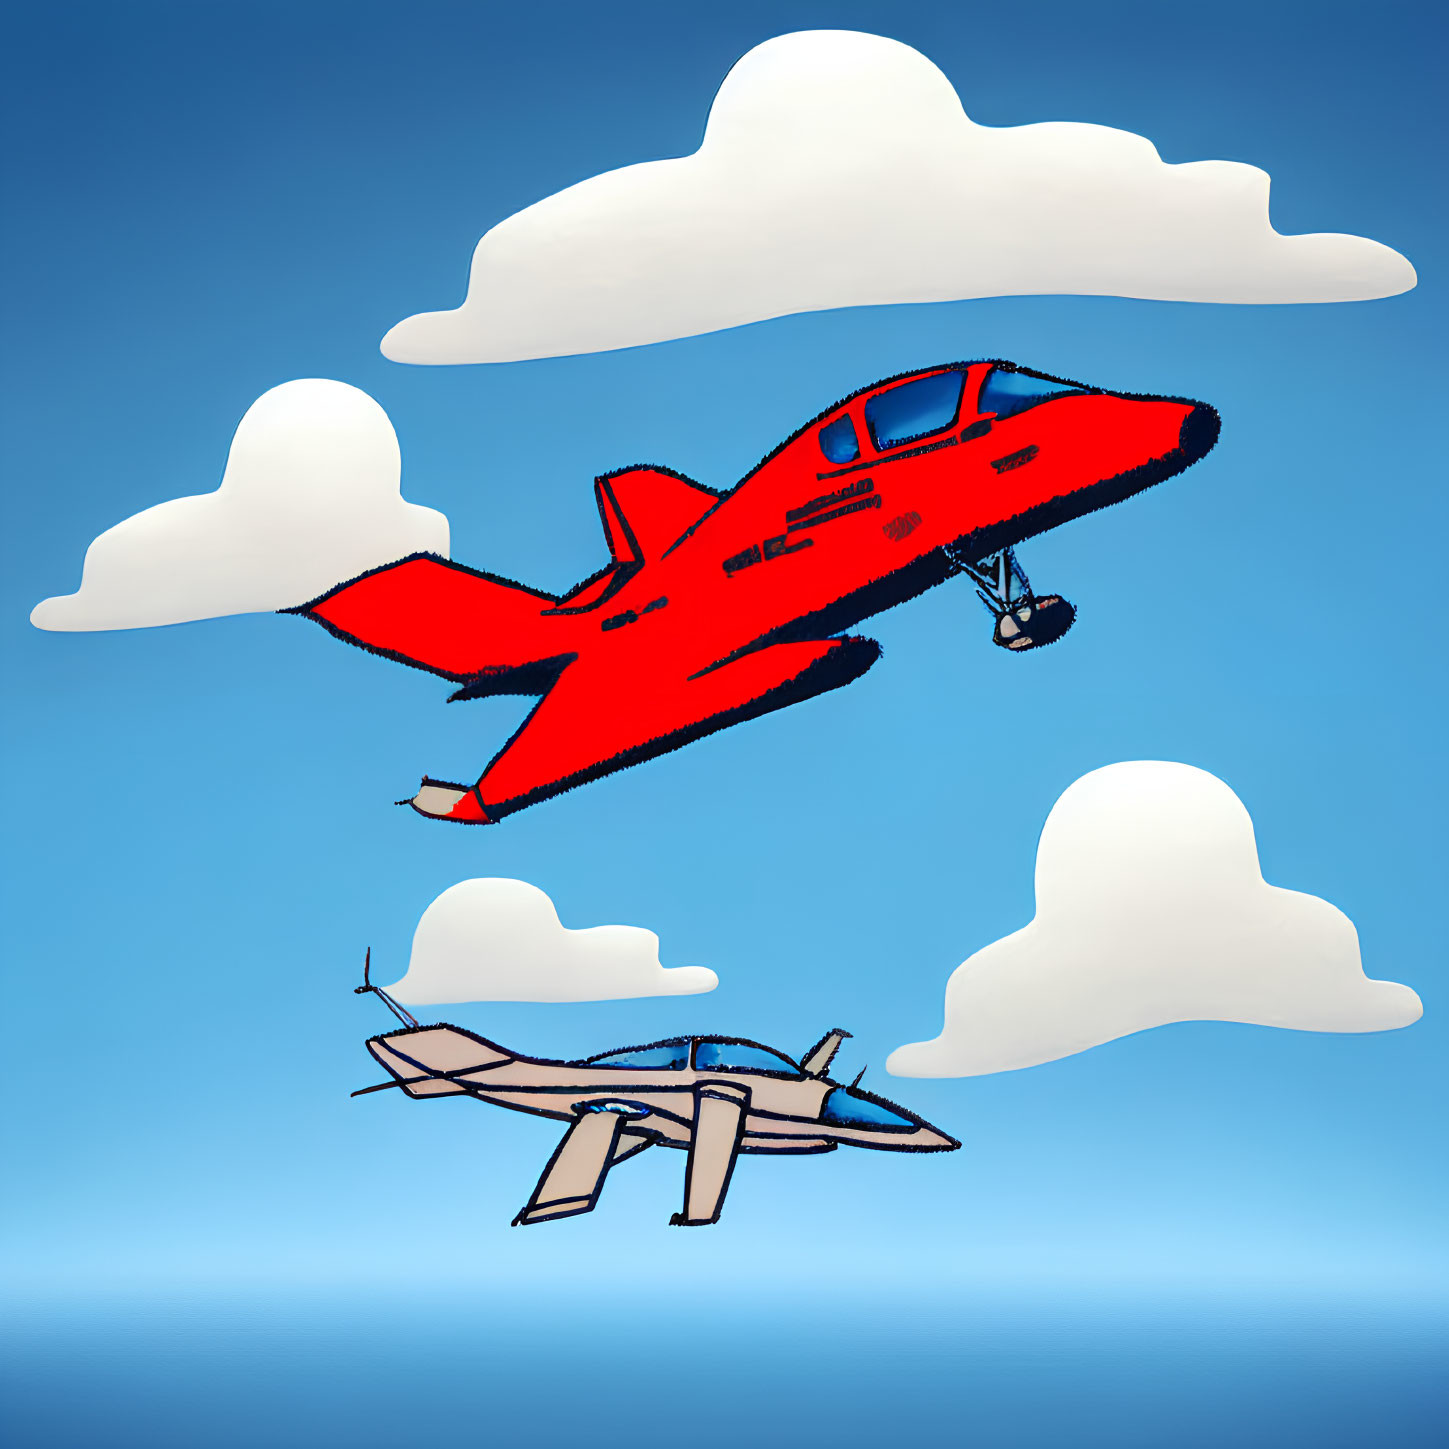 Cartoon airplanes flying in blue sky among clouds